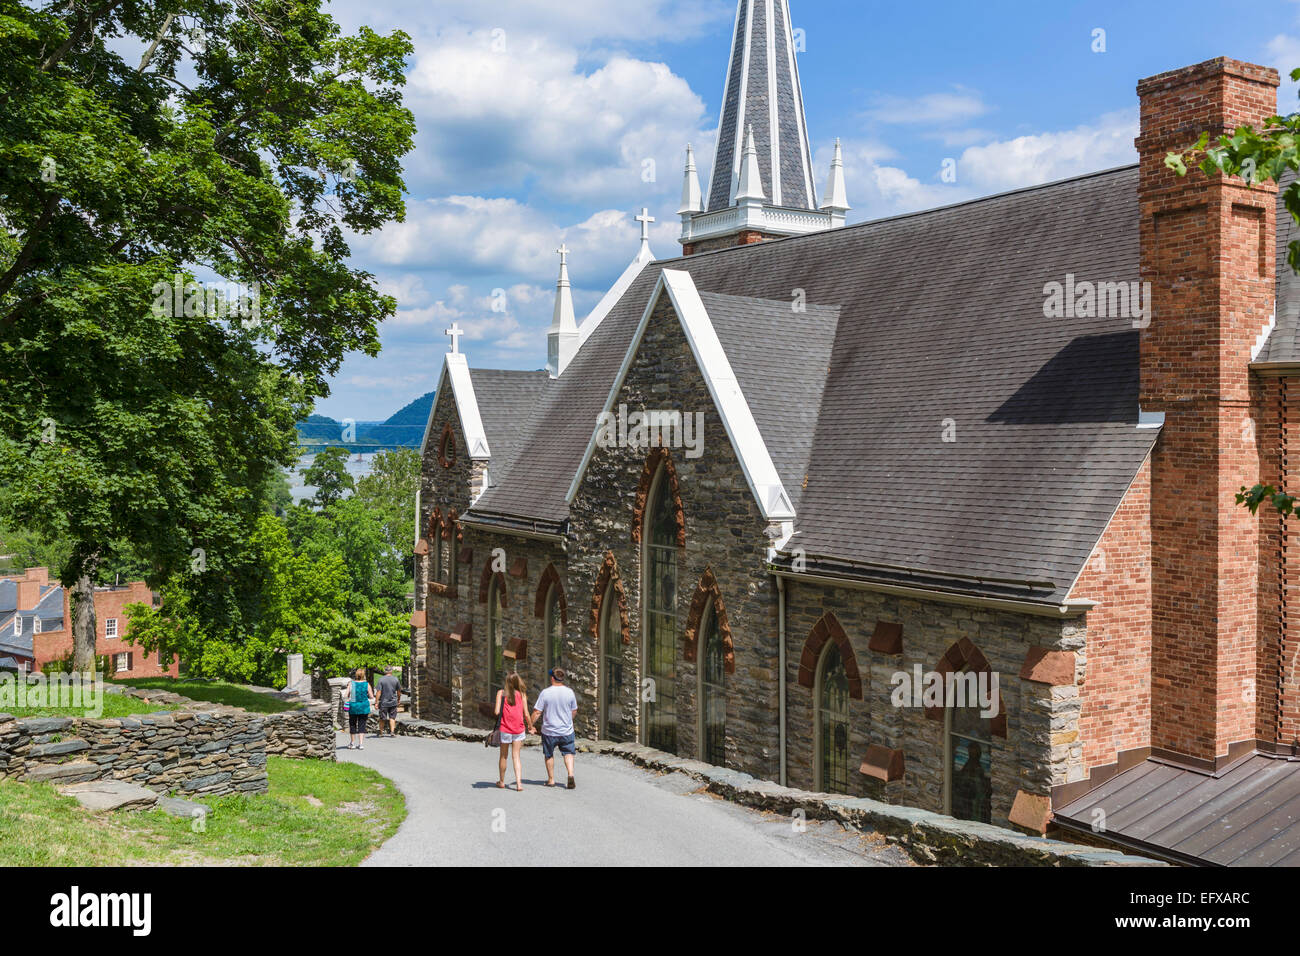 St Peter's Roman Catholic church in historic Harpers Ferry, Harpers Ferry National Historical Park, West Virginia, USA Stock Photo